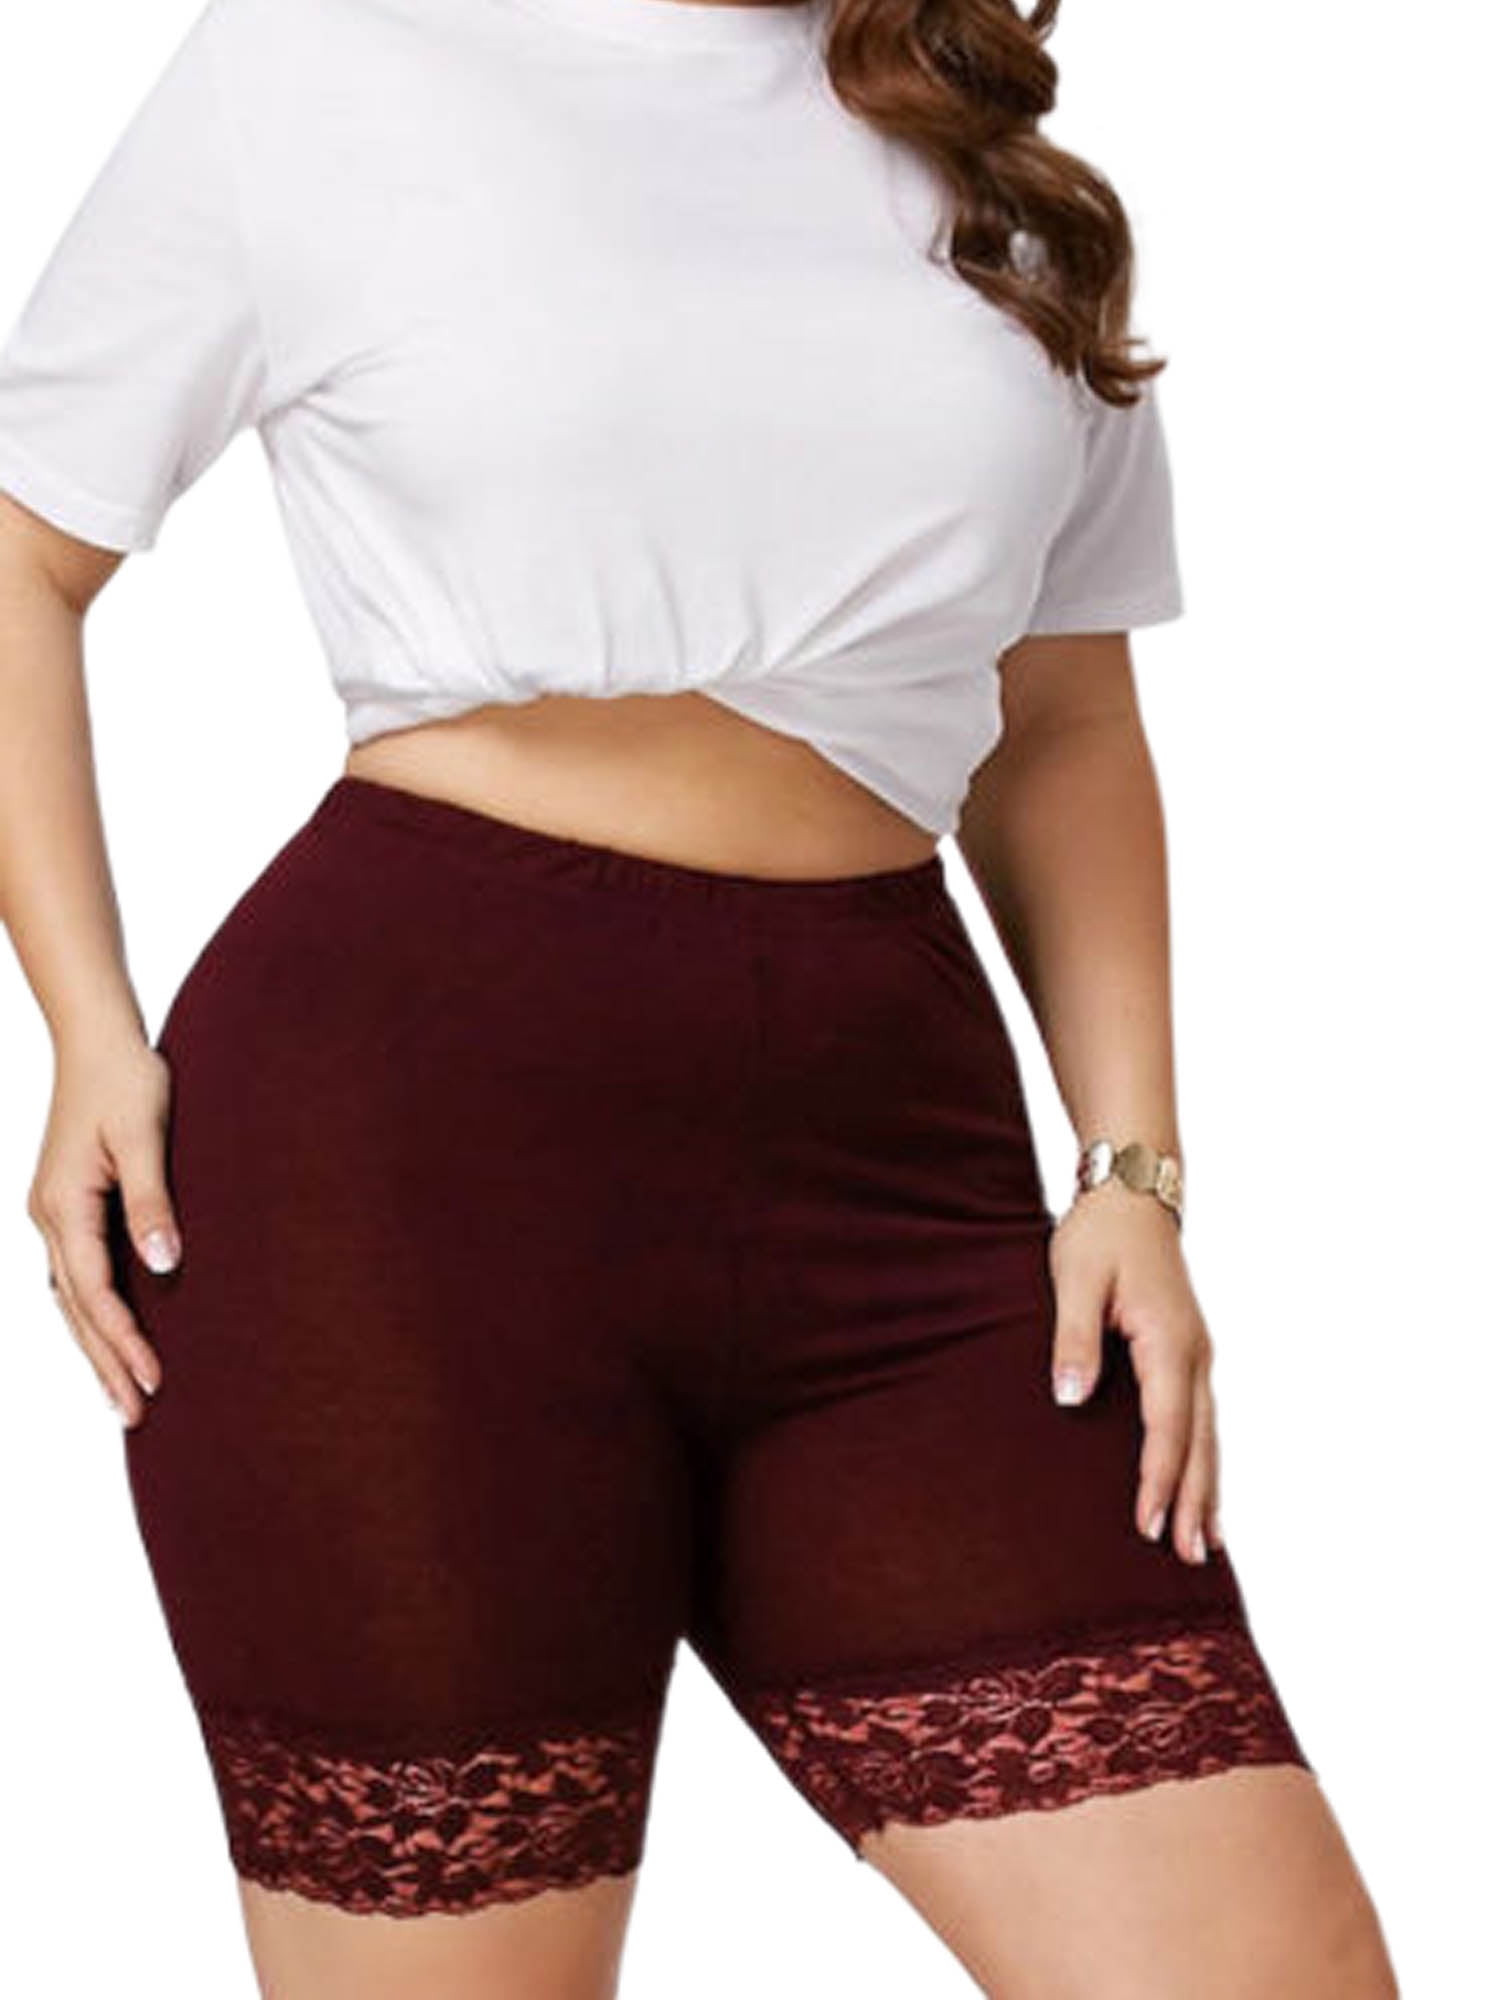 Imcute Women Plus Size Lace Stretch Safety Shorts Leggings Gym Tights  Active Shorts Cycling Hot Pants Wine Red XXXL